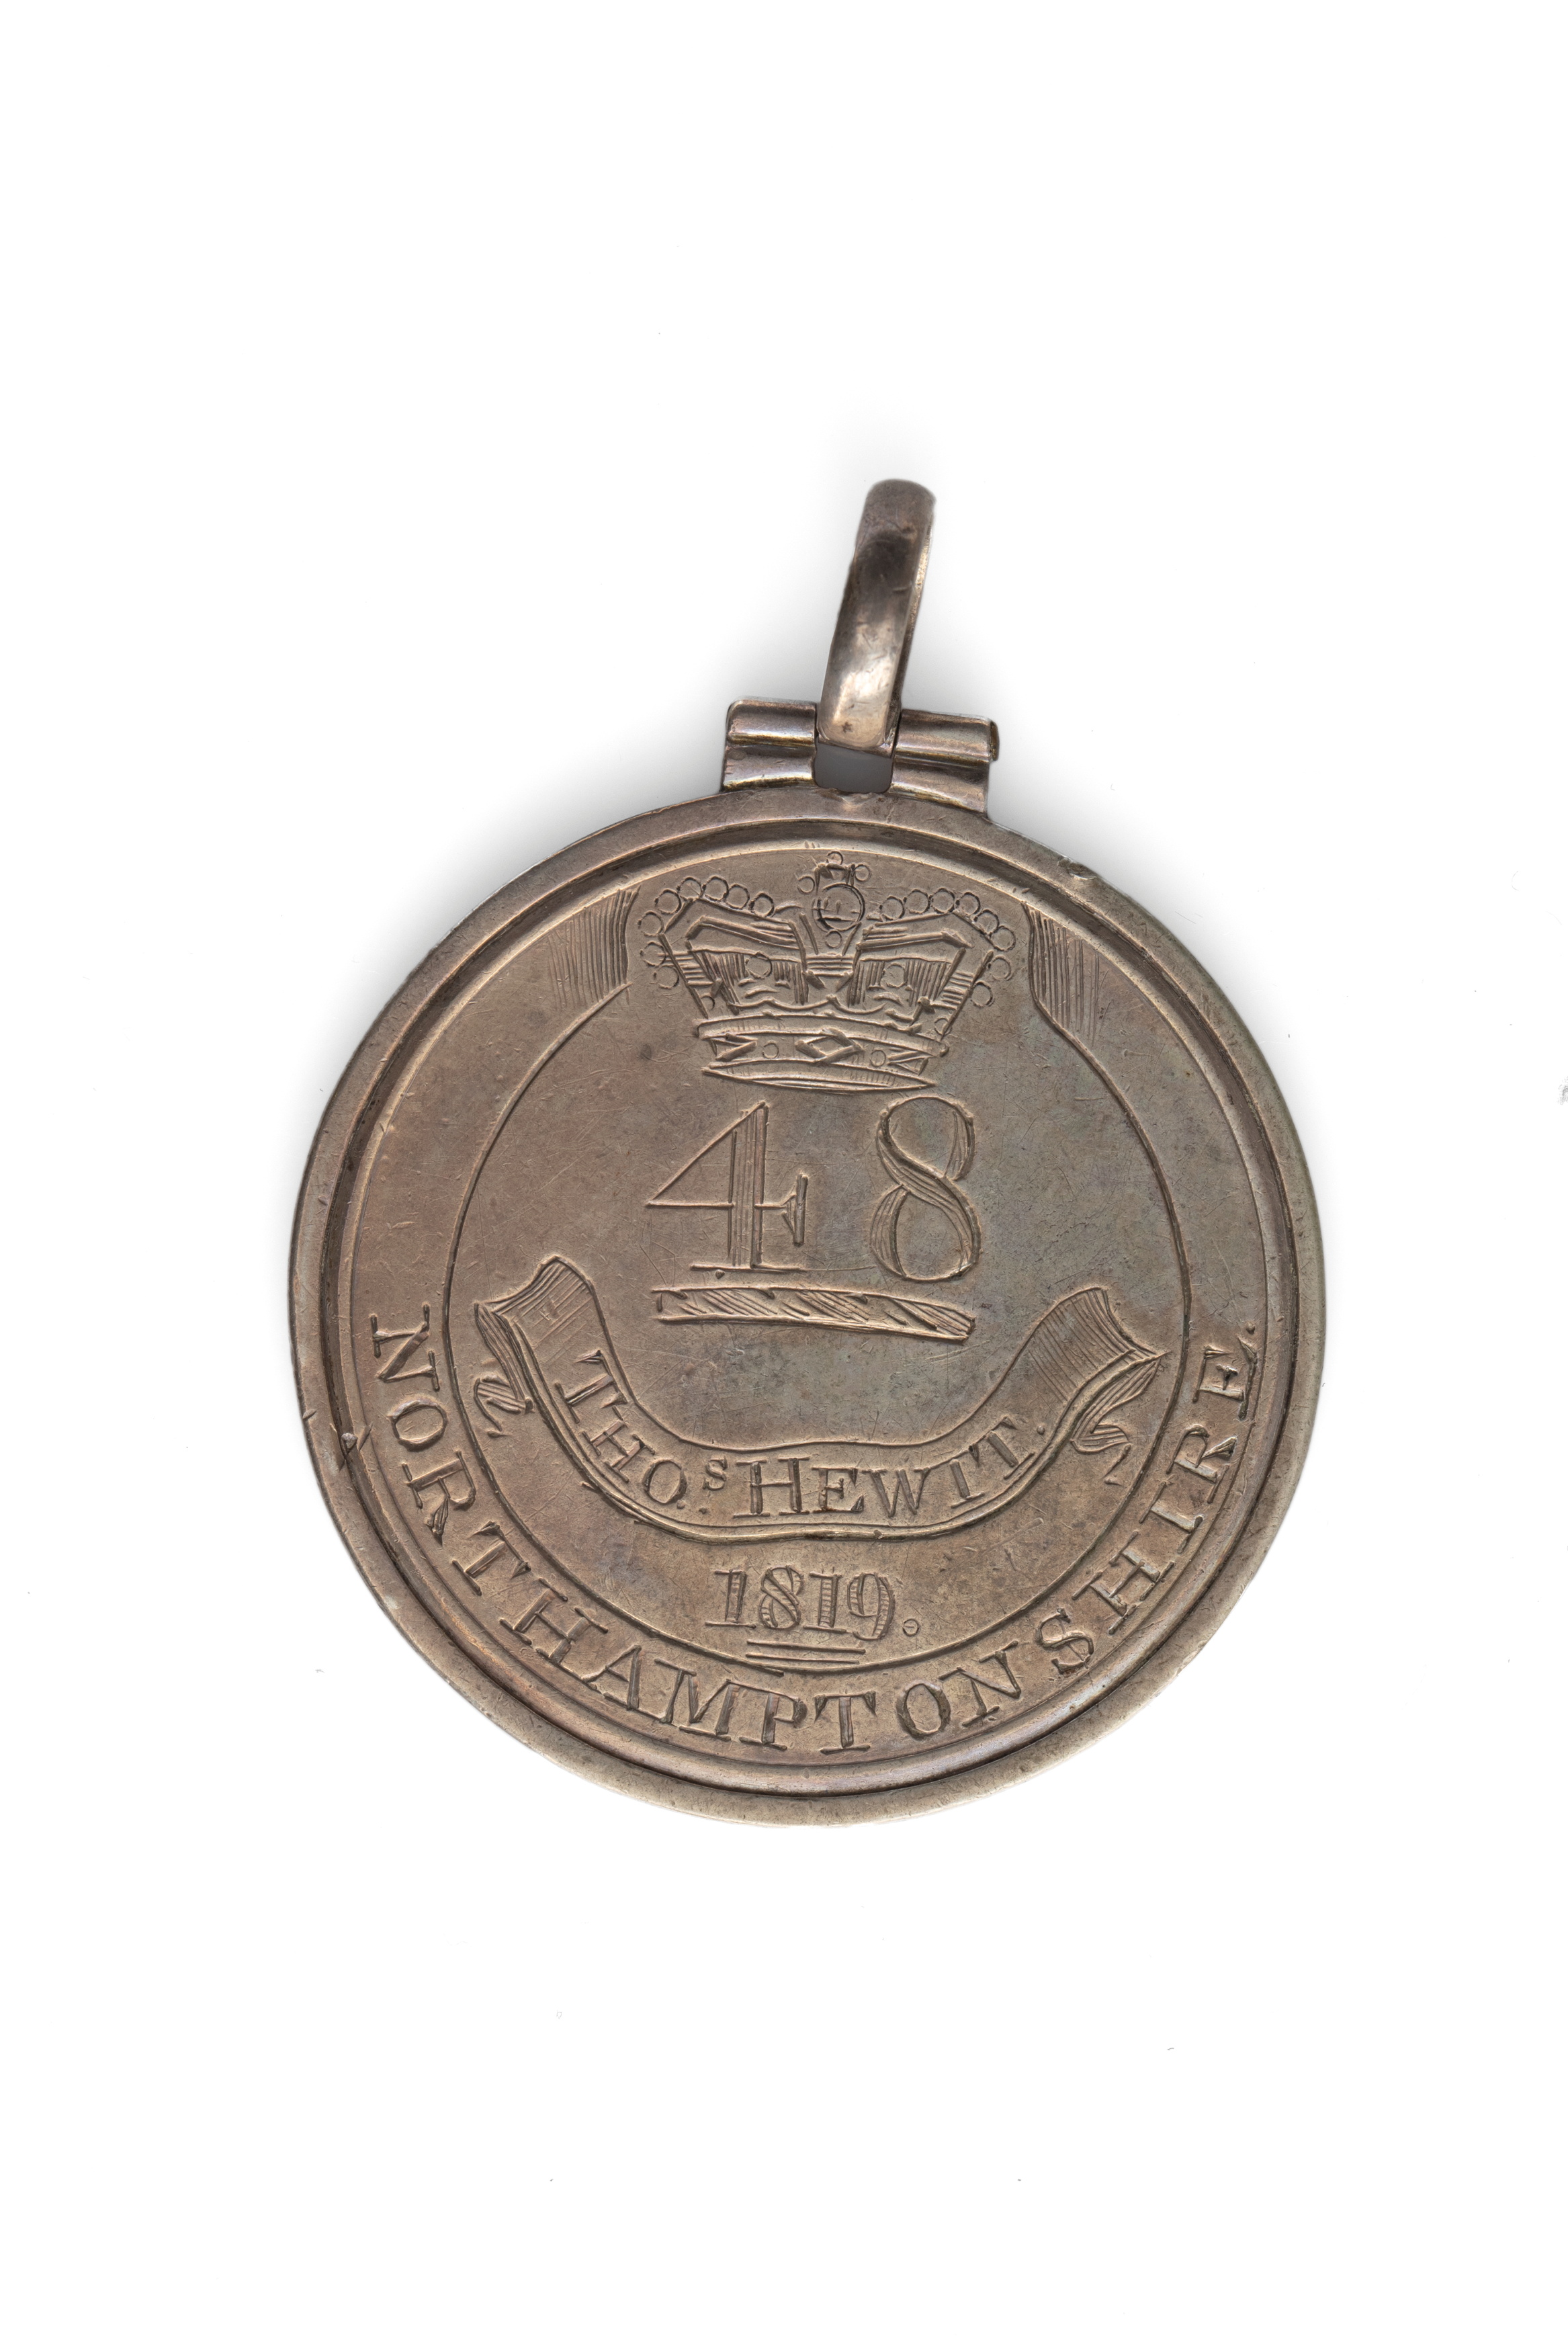 Military medal for the Regimental Medal of the 48th (Northhamptonshire) Foot